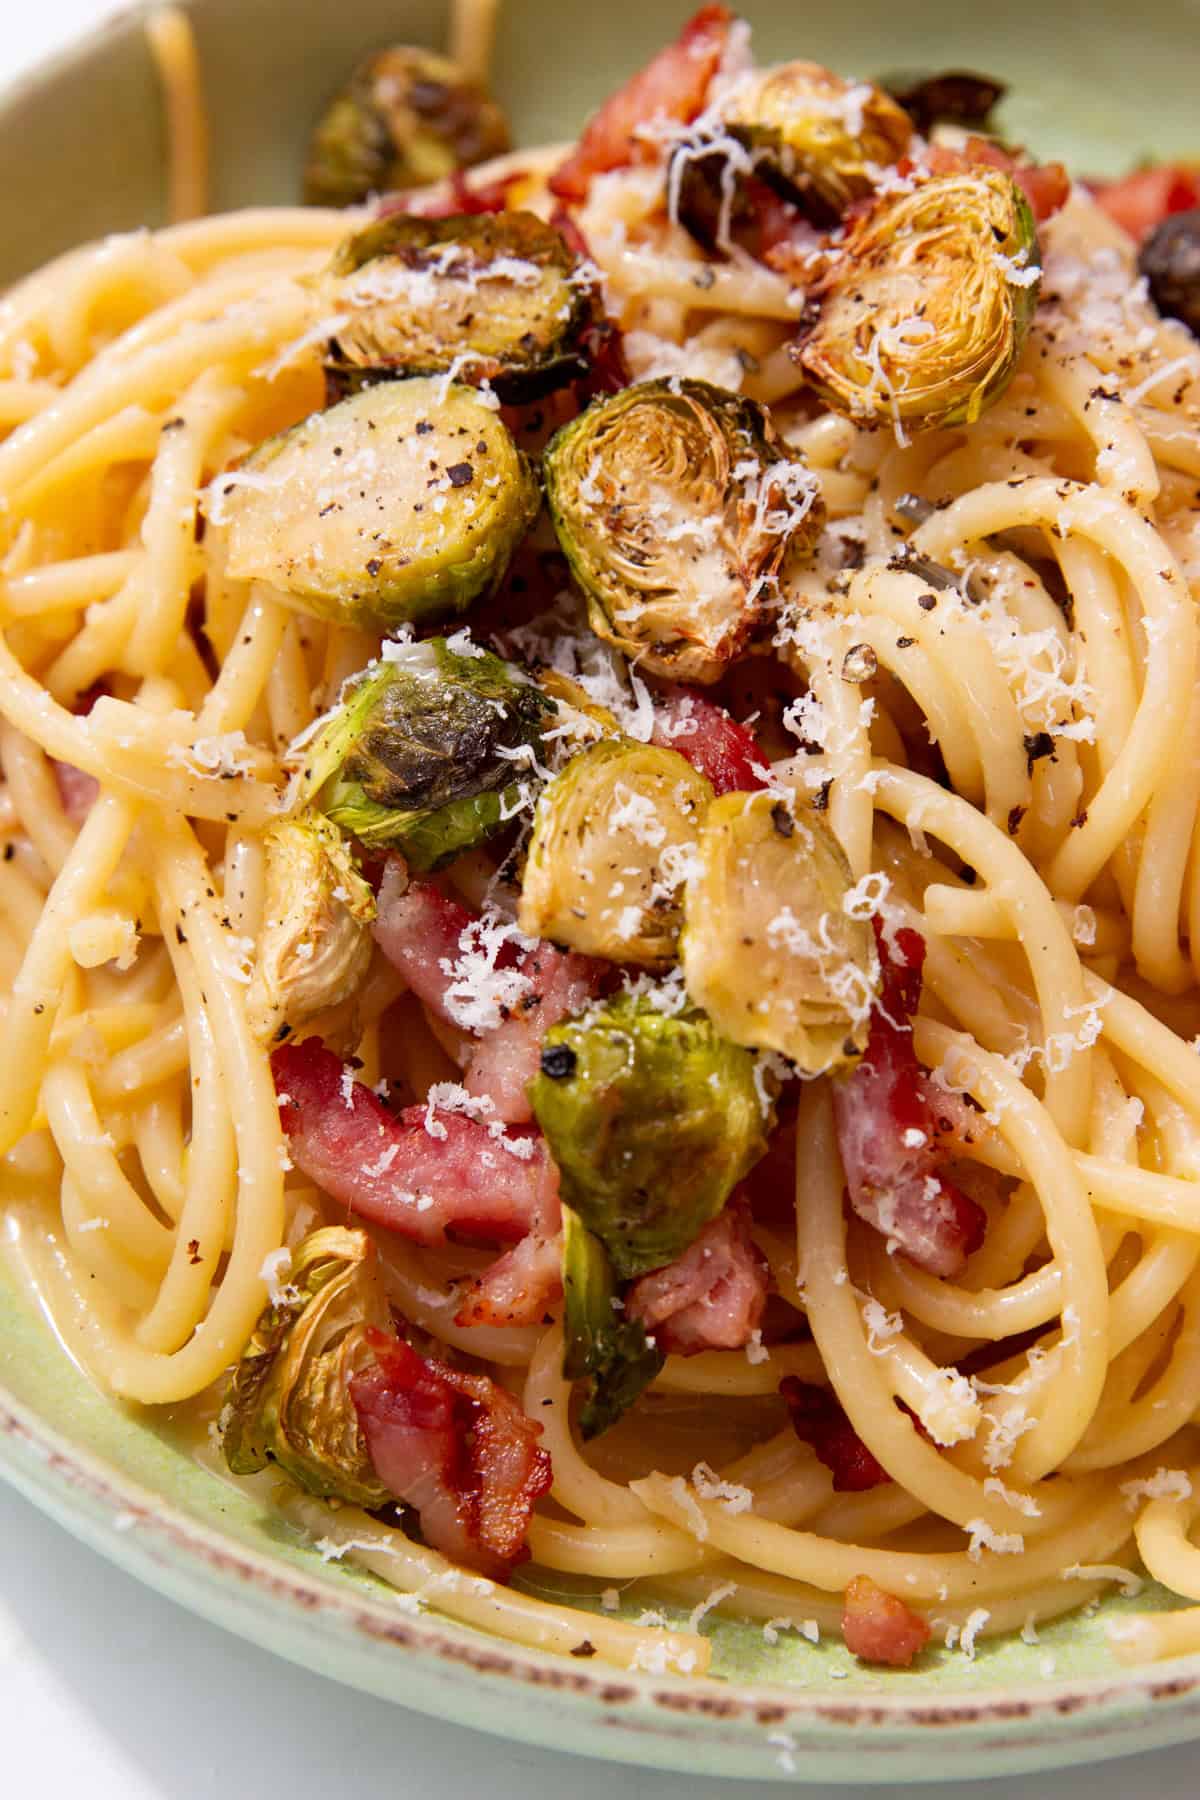 Spaghetti with roasted Brussel sprouts, bacon and parmesan shavings in a bowl.